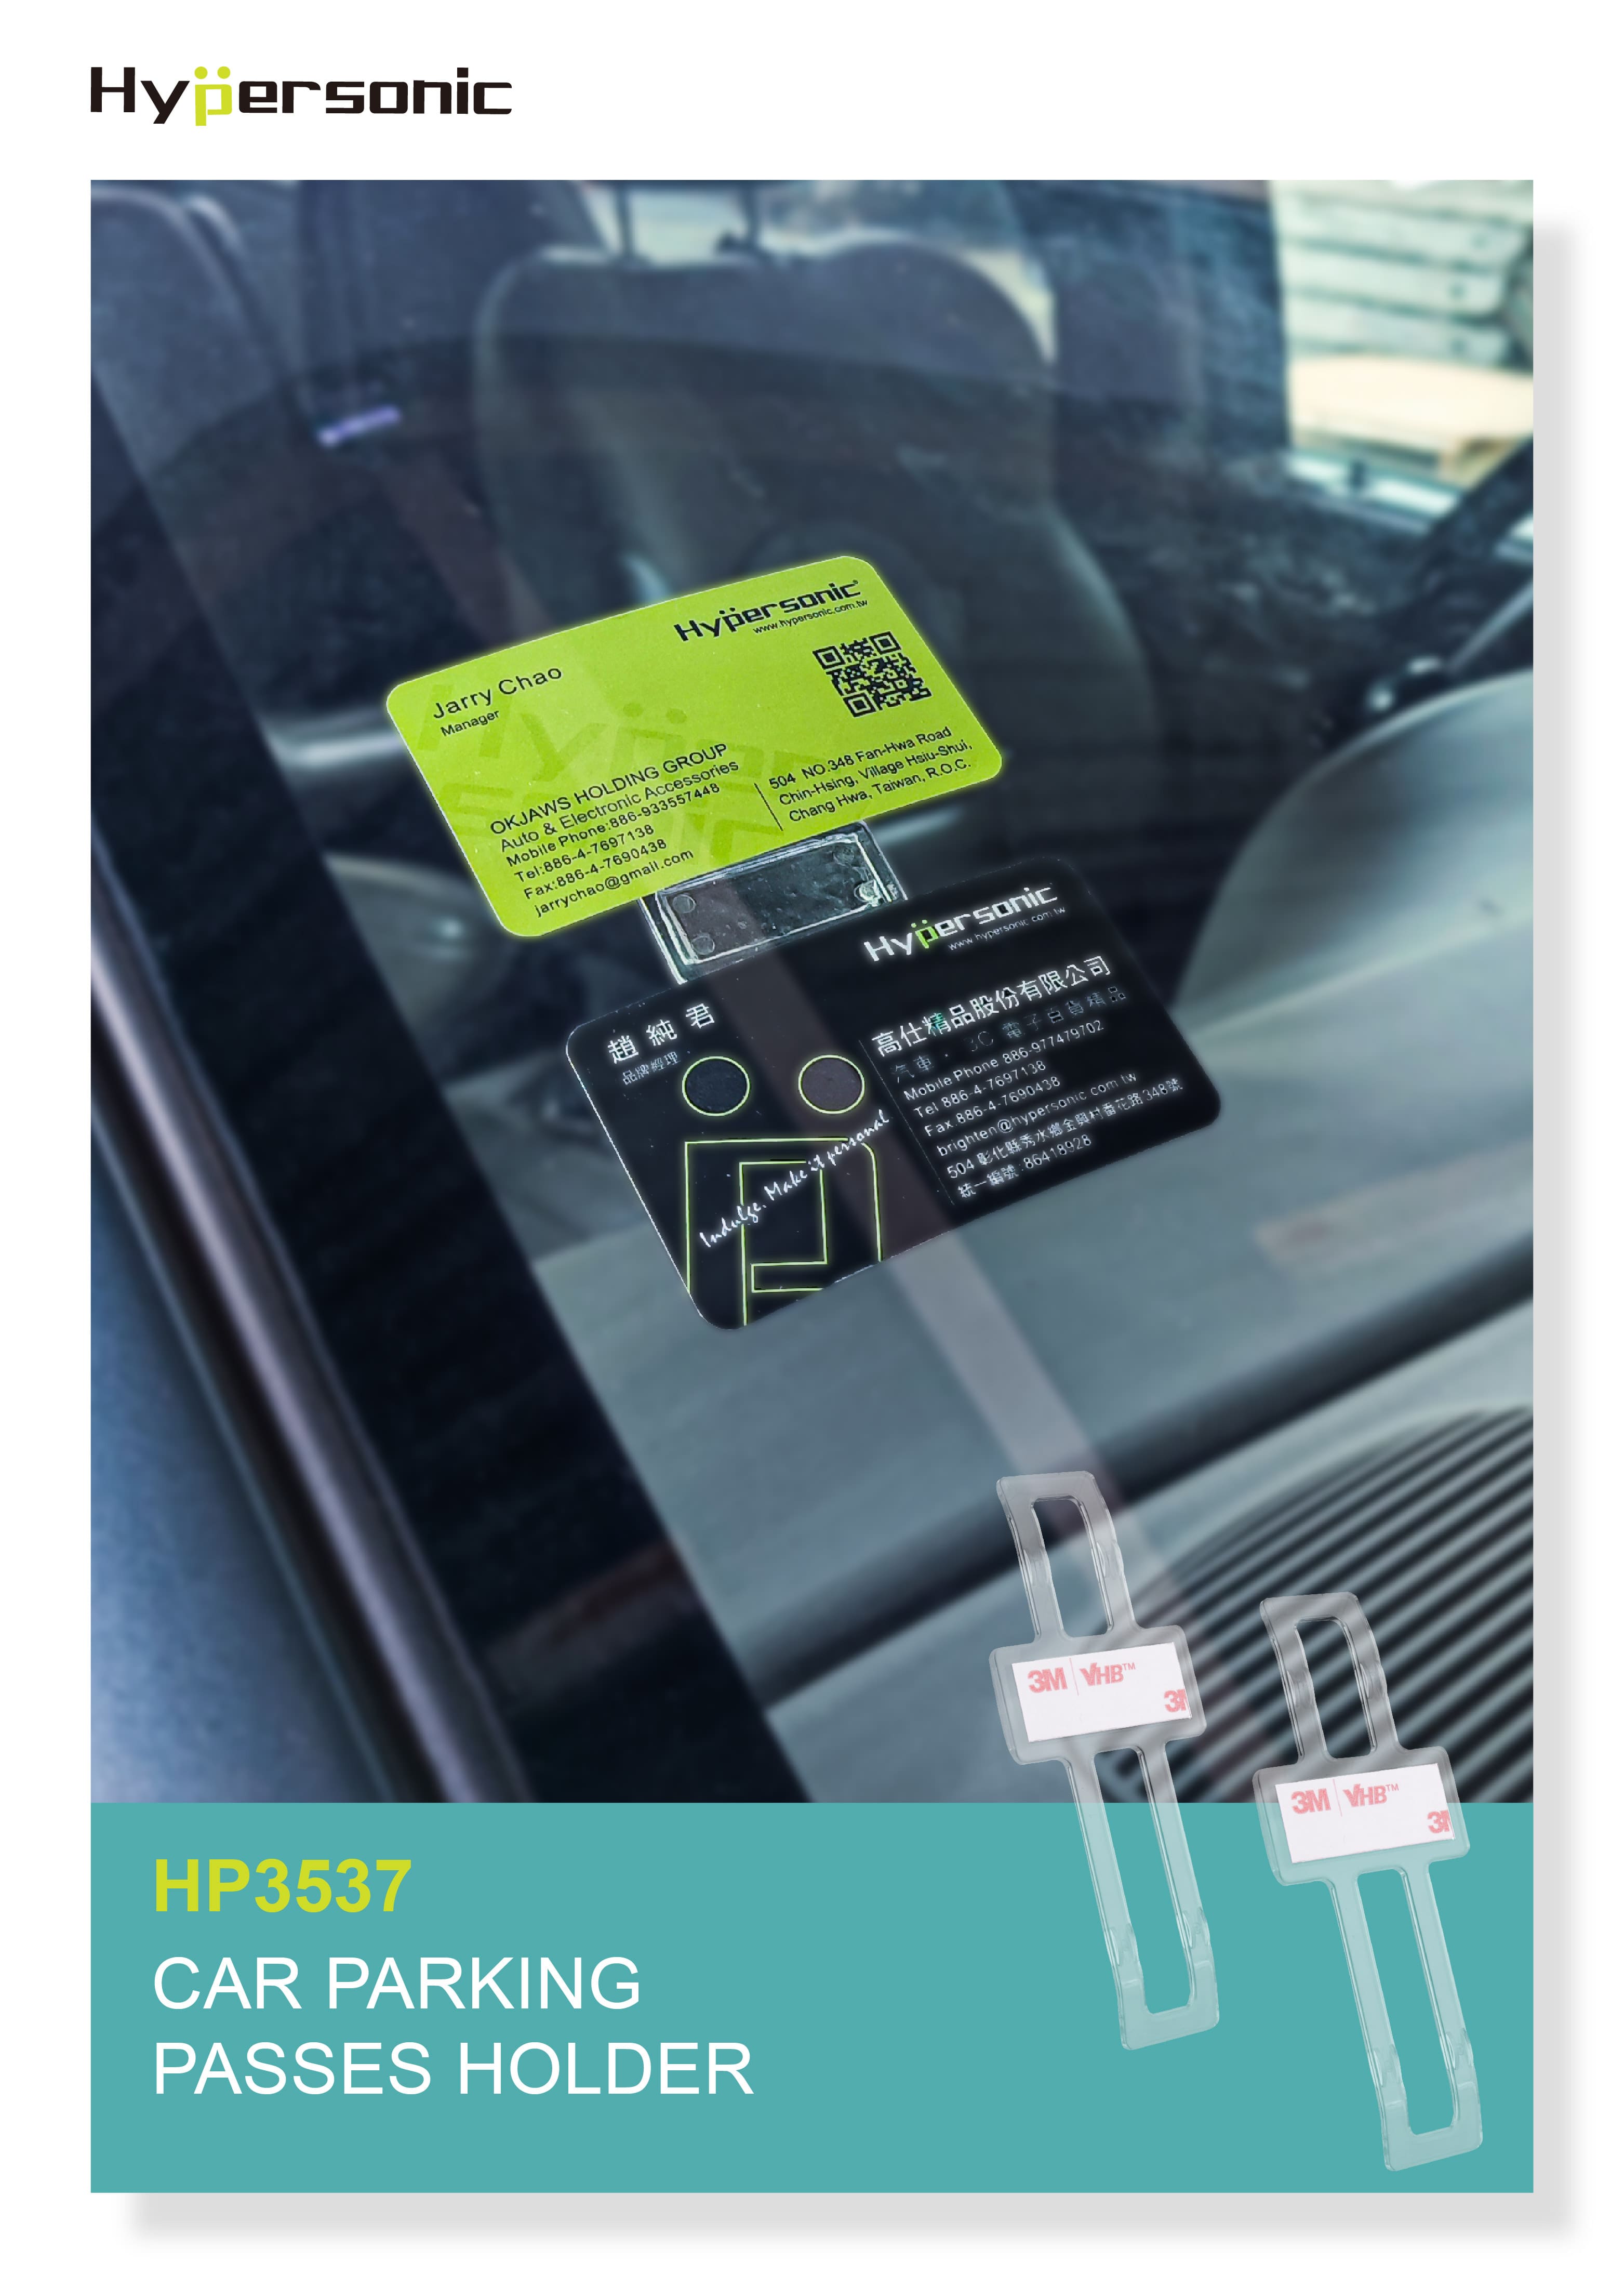 CARD PARKING PASSES TICKET HOLDER CLIP HP3537